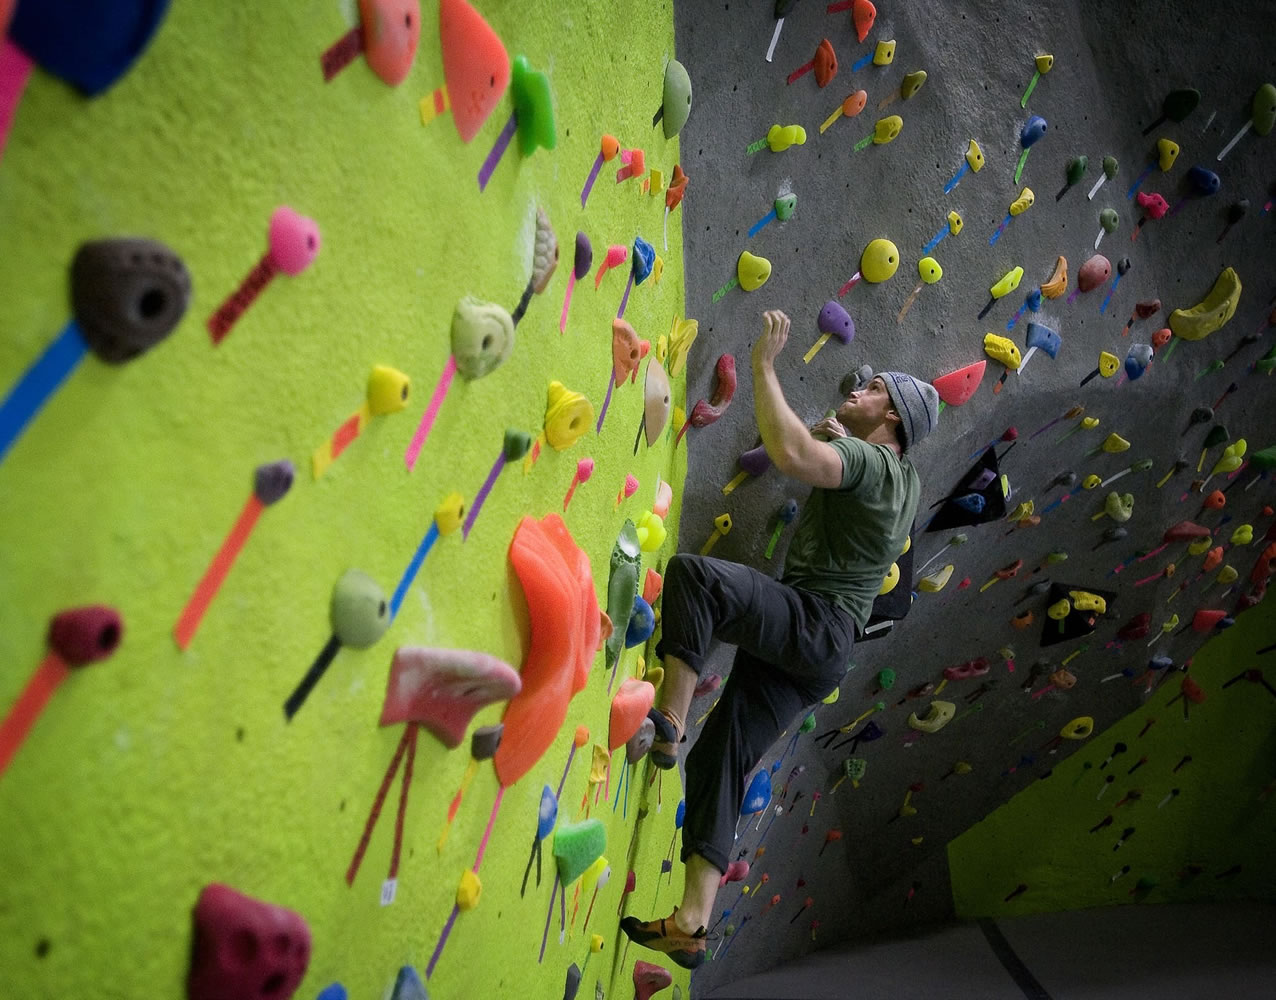 James Carr, 25, of Vancouver climbs a rock wall Wednesday at a new fitness center ahead of its scheduled Friday opening.